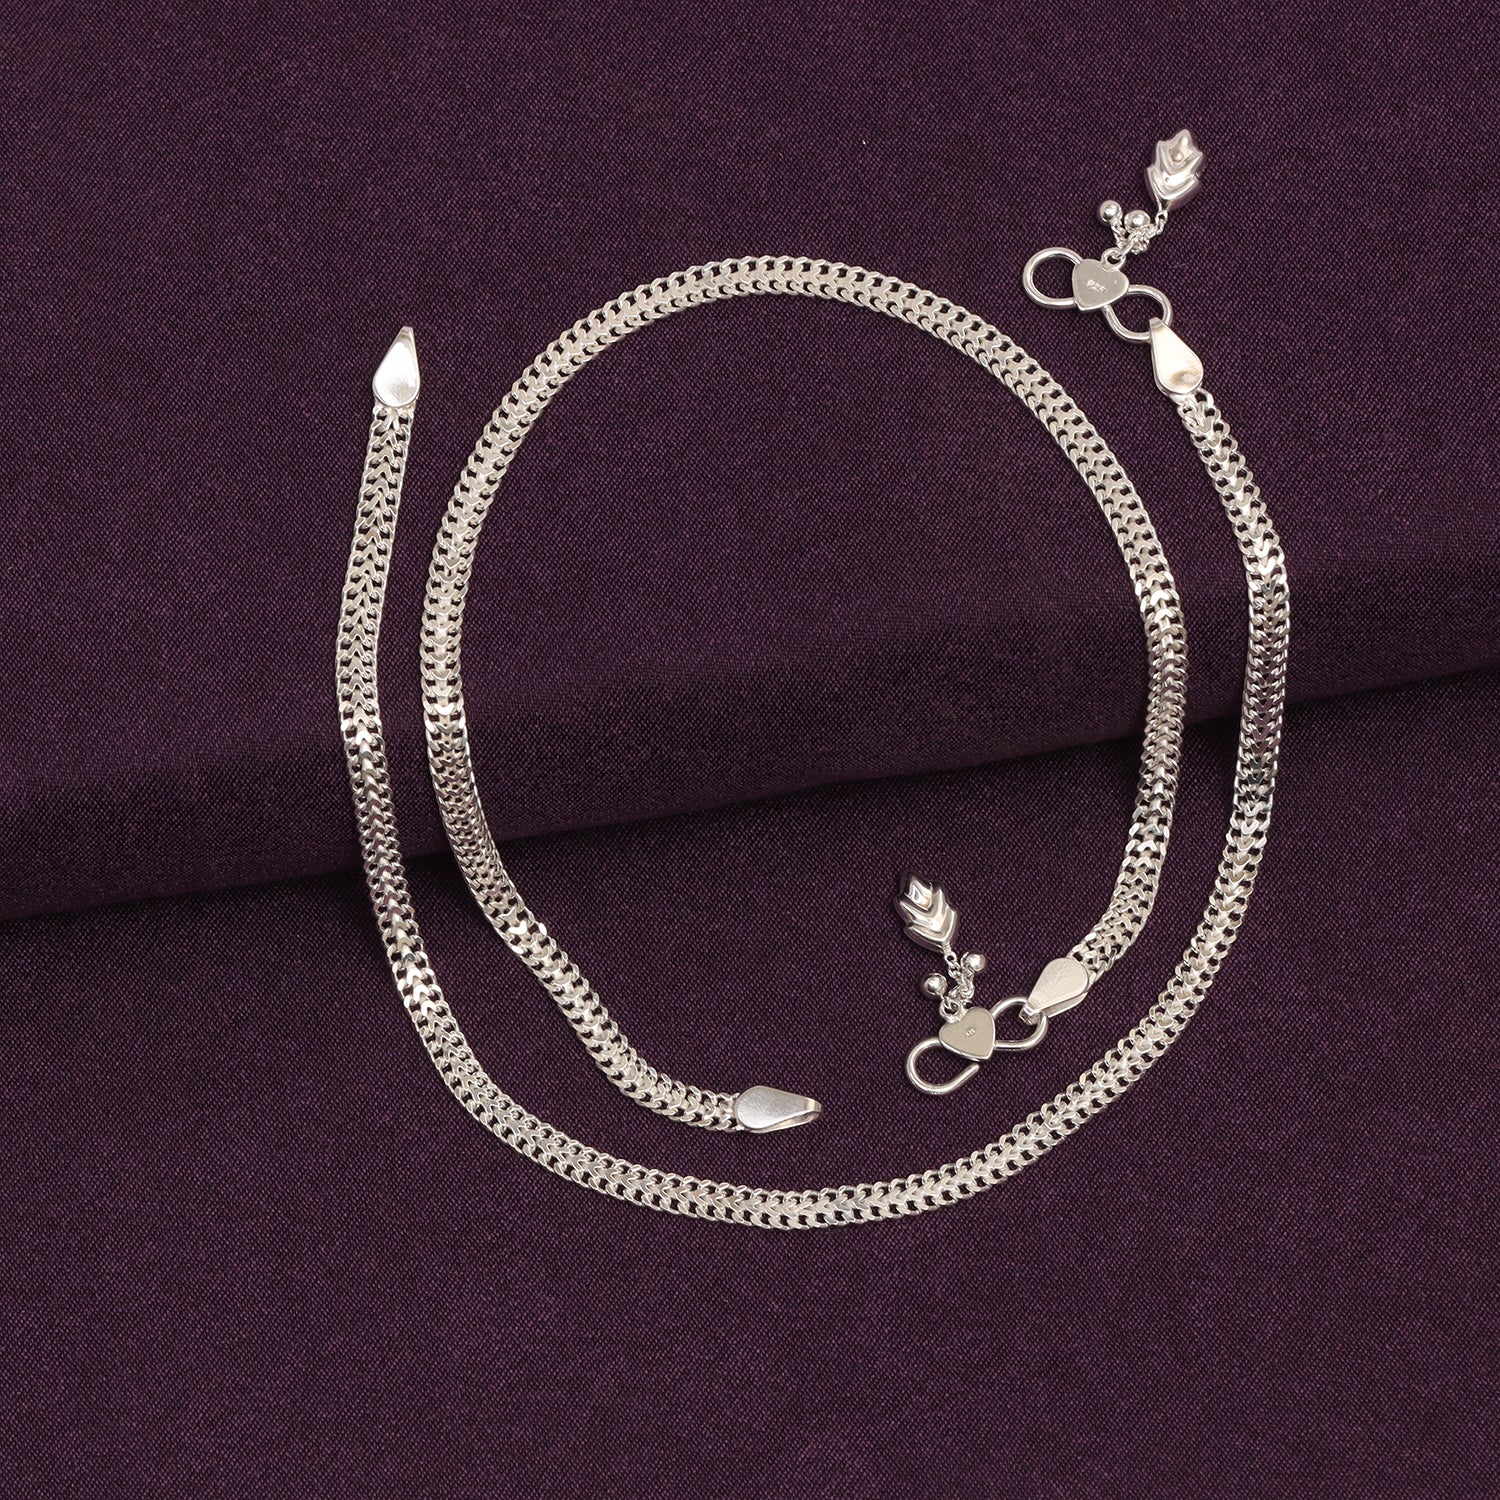 925 Sterling Silver Leaf Charm Curb Chain Anklet for Women